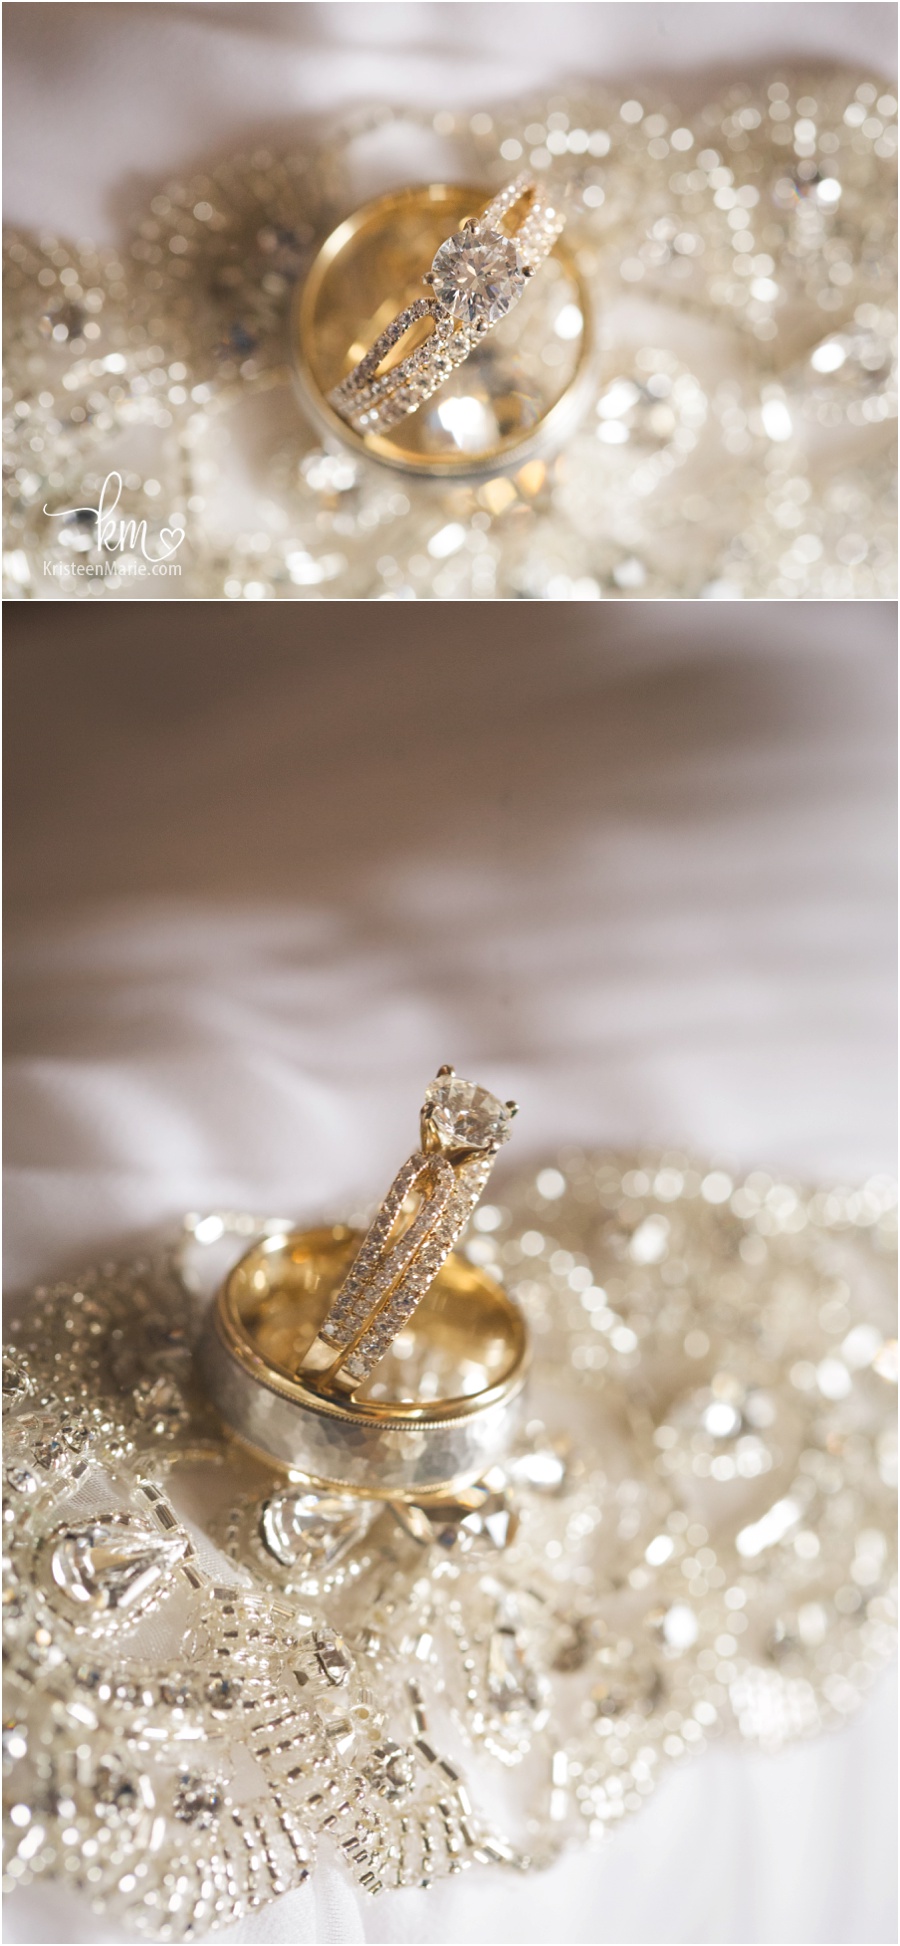 stunning wedding ring picture